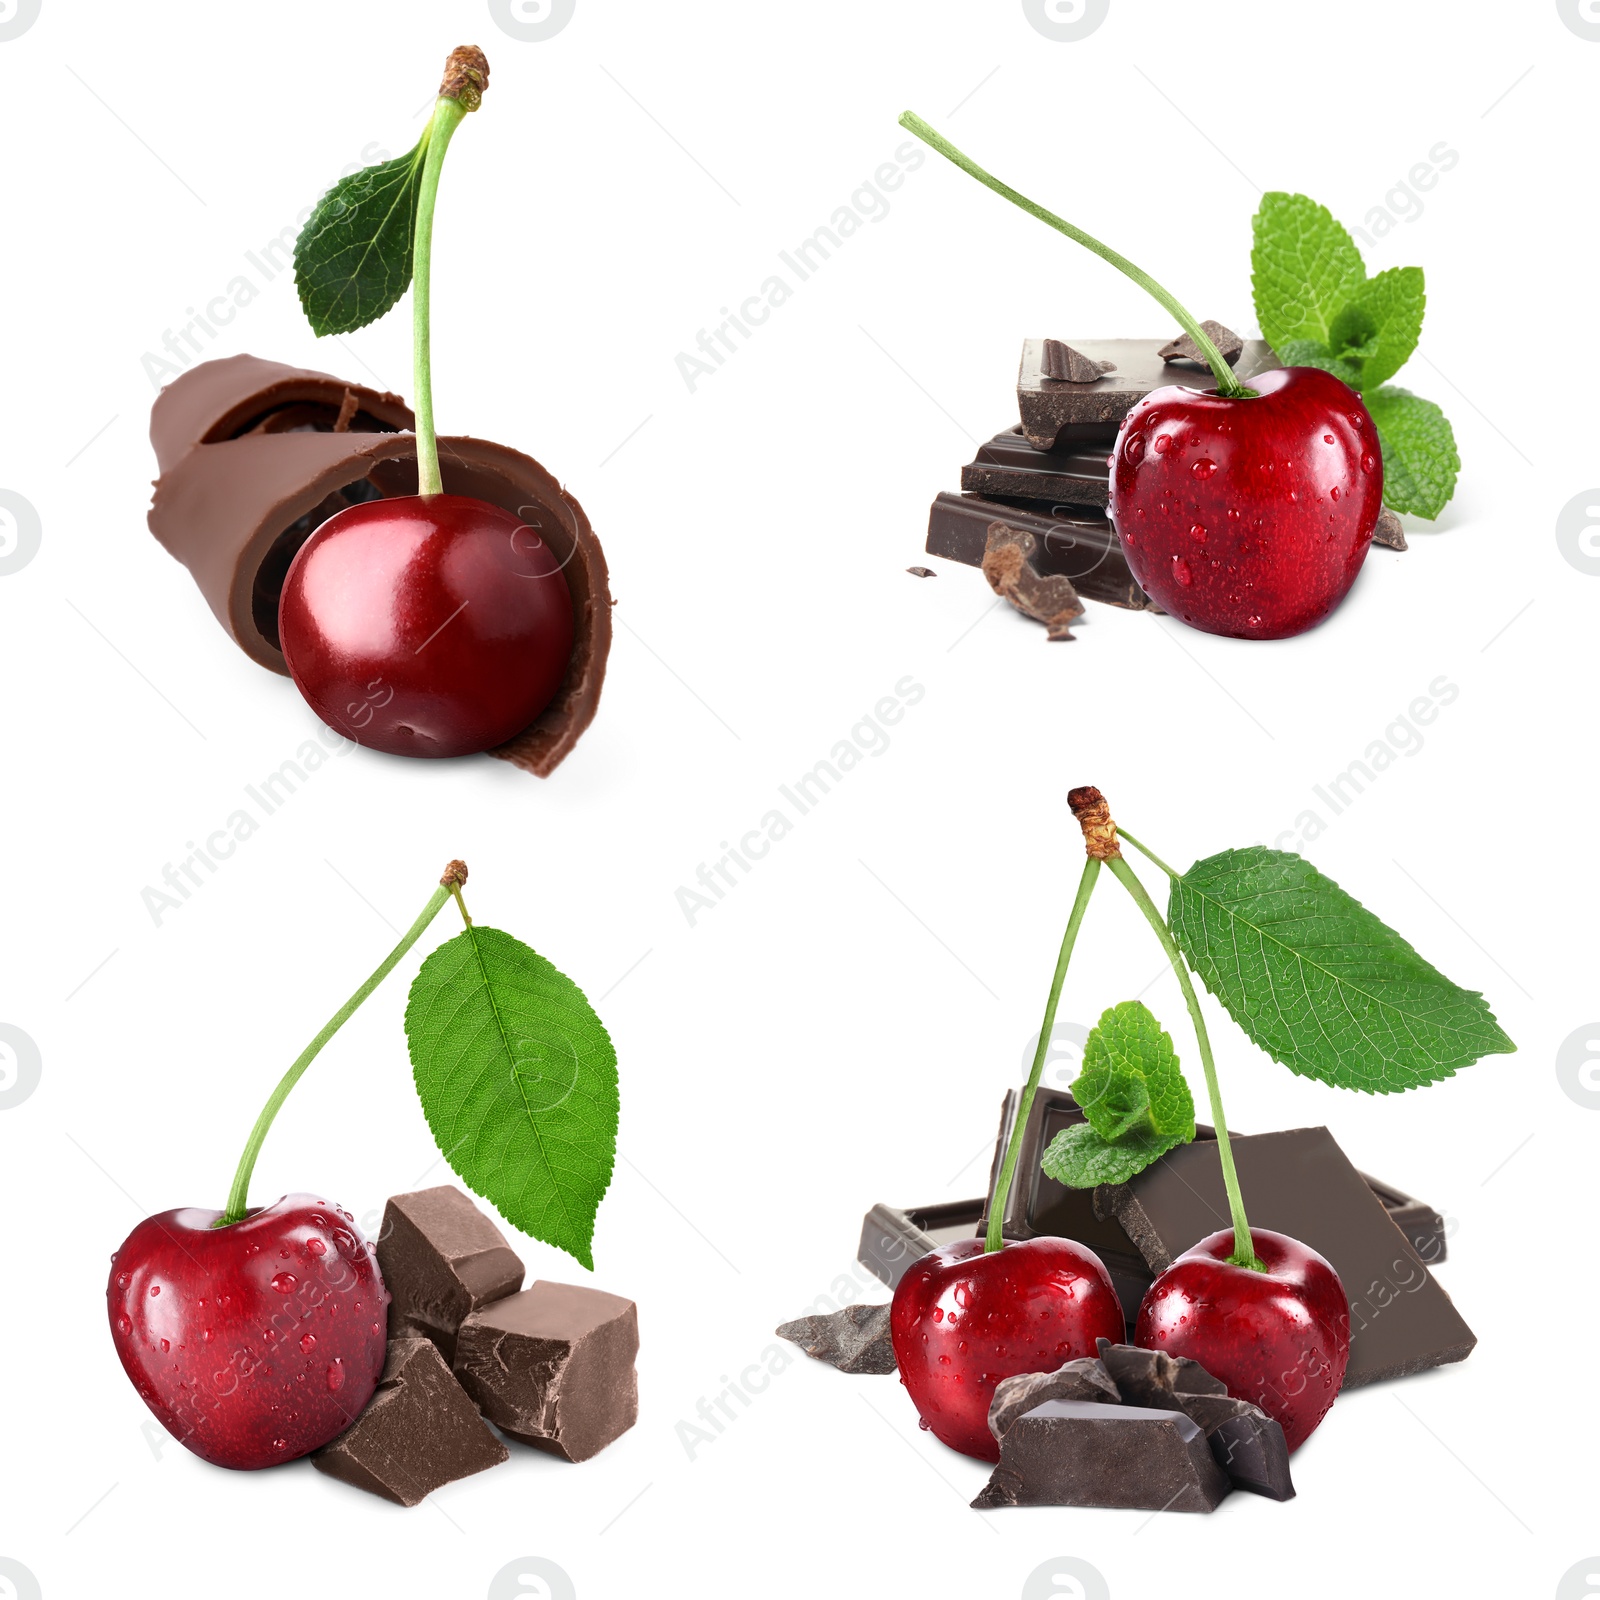 Image of Fresh cherries, pieces and curls of chocolate isolated on white, collage